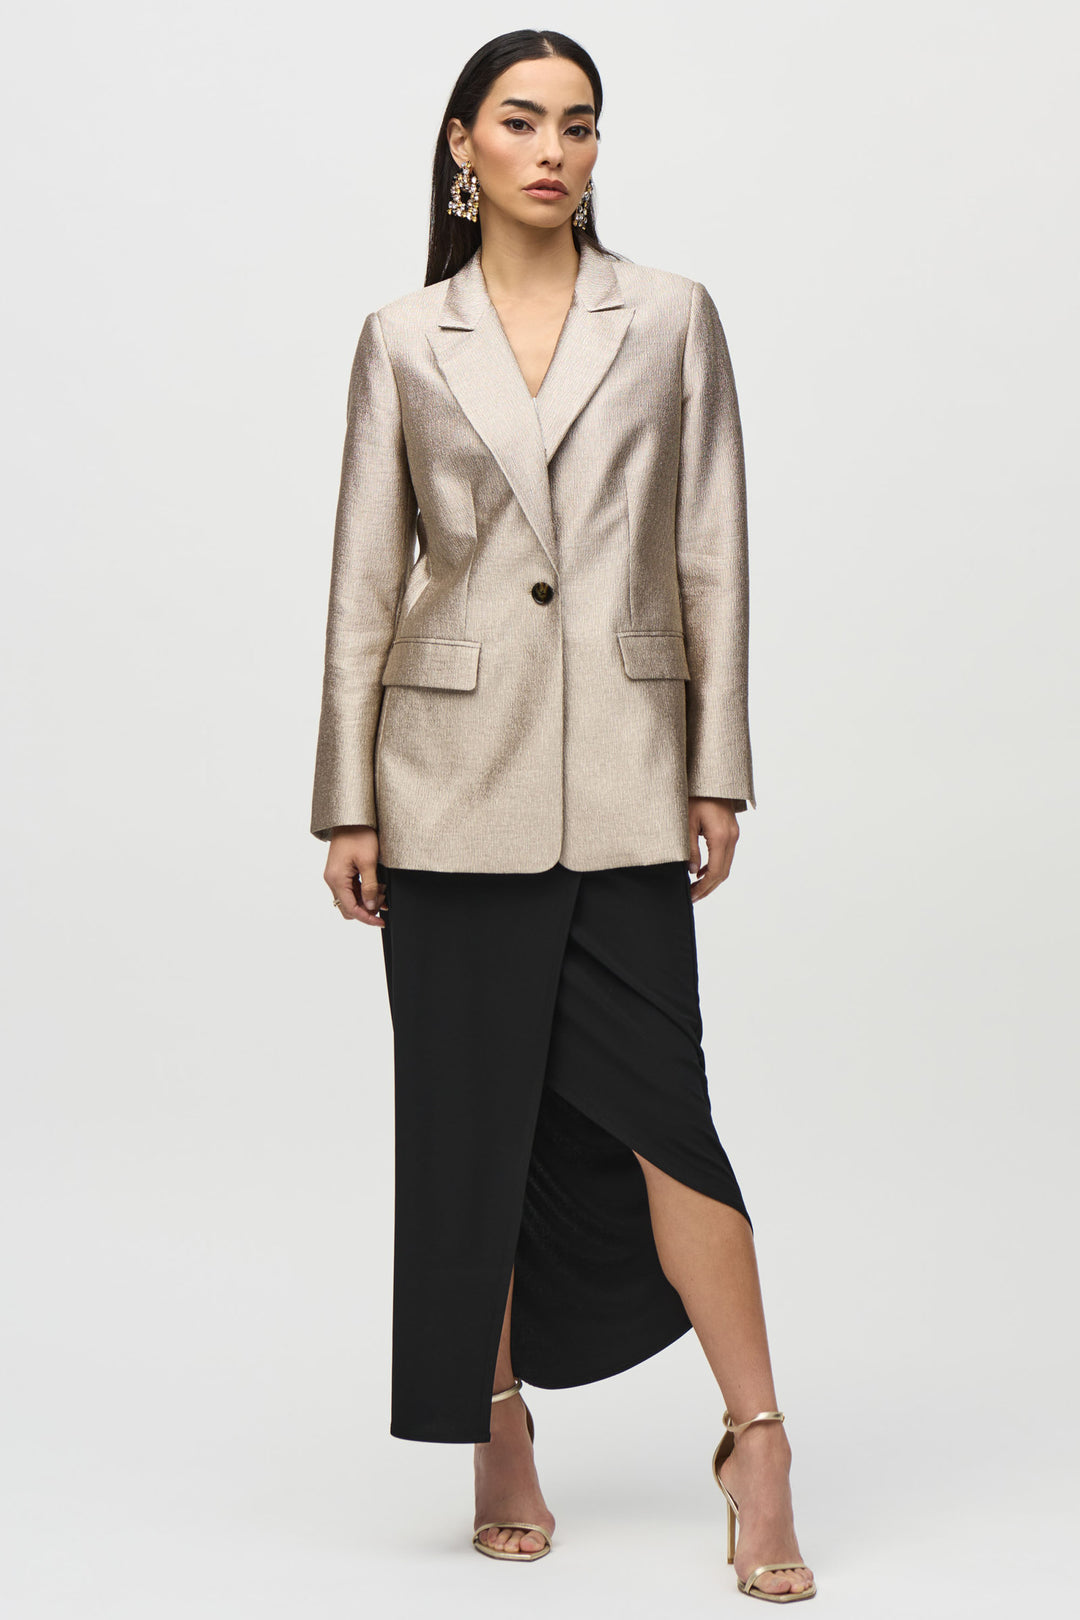 Joseph Ribkoff Fall 2024  Featuring stylish side cut slits that create a unique wrap around look, this high-waisted, full length skirt allows you to showcase your individual style. 